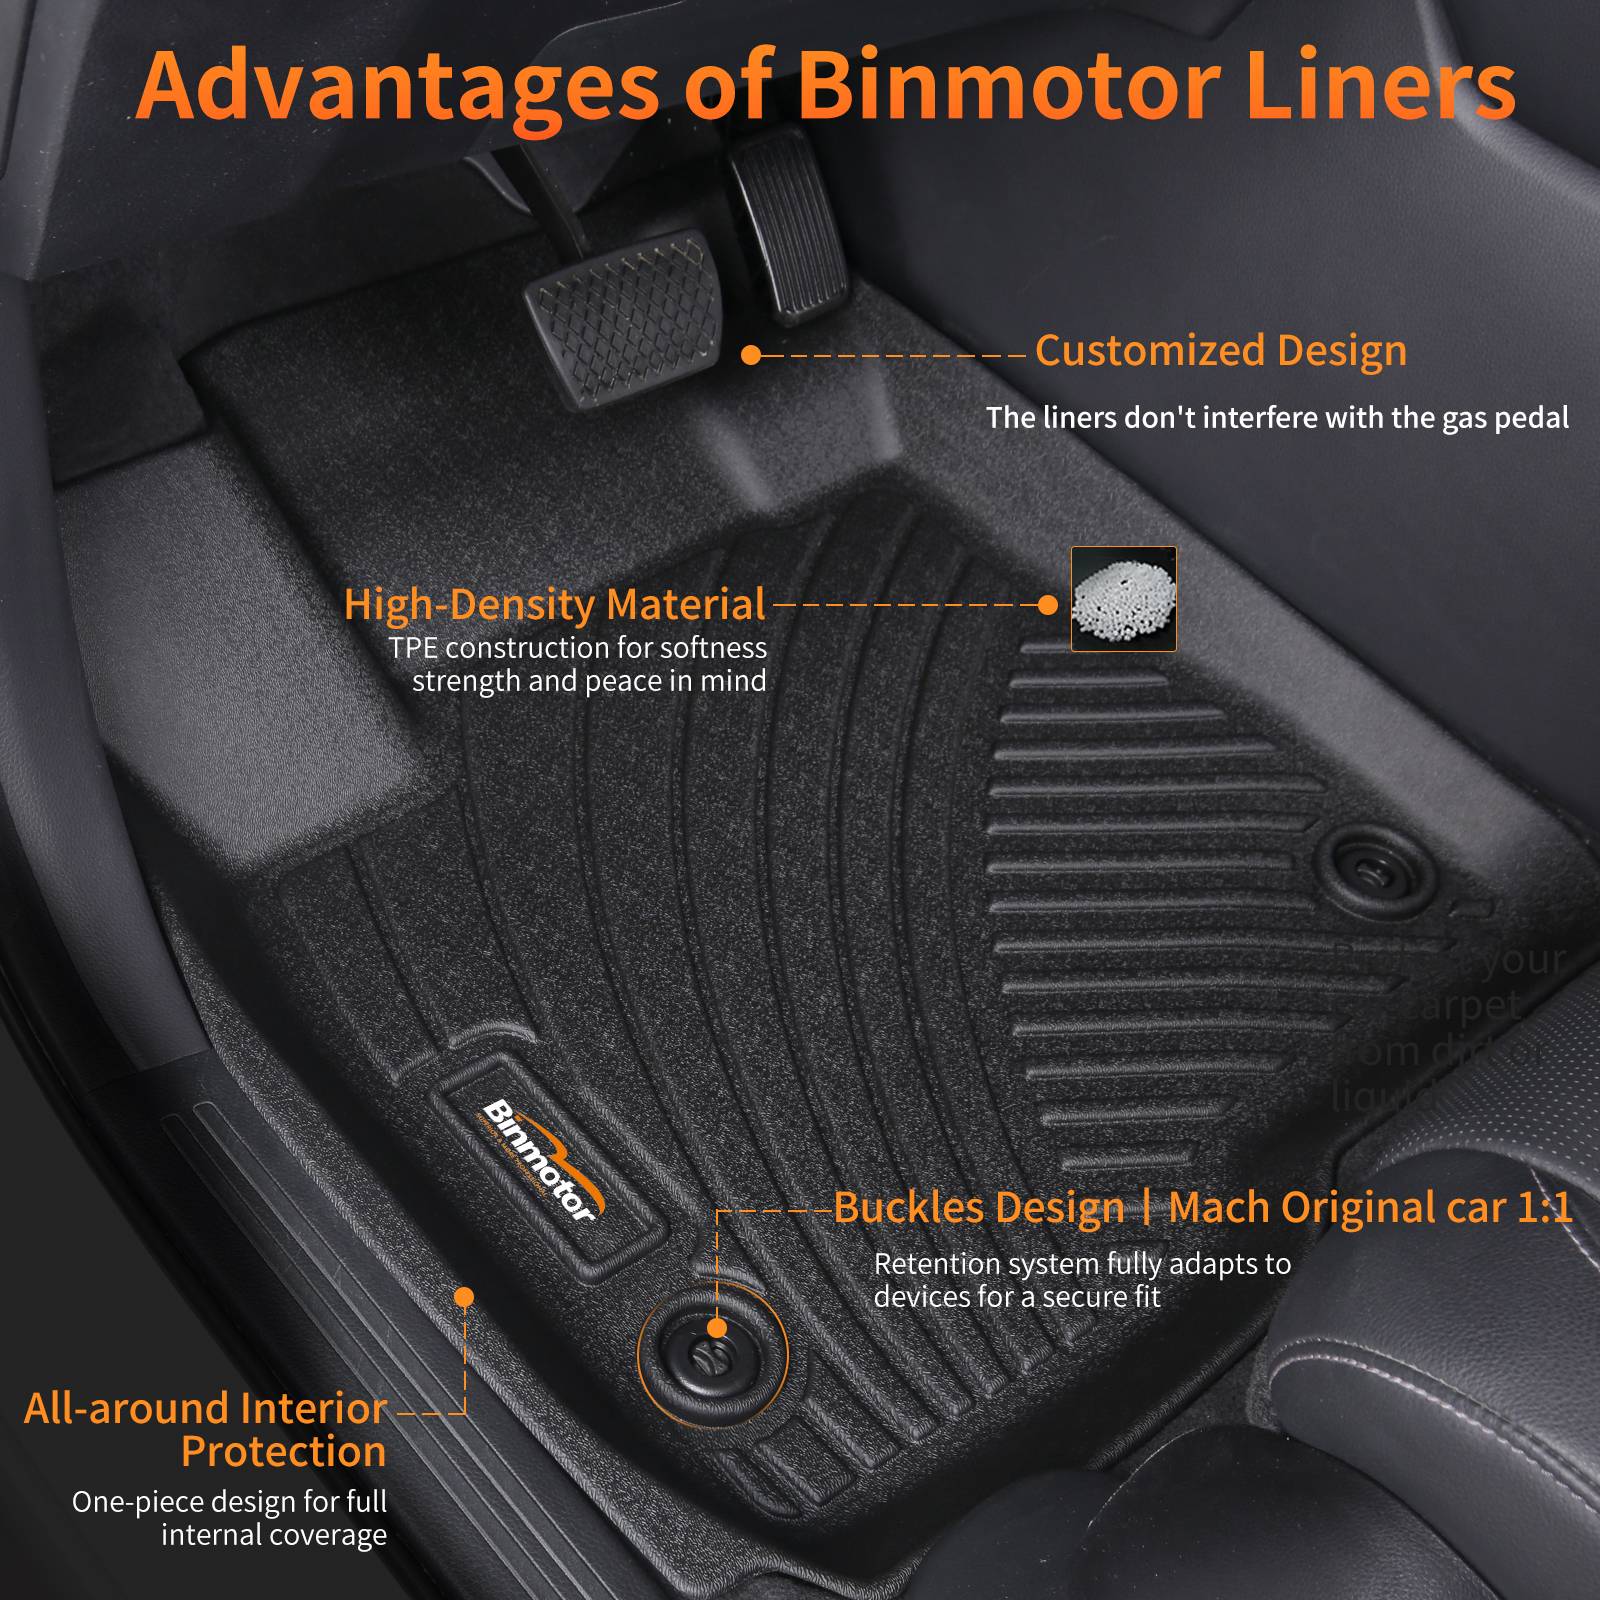 Binmotor- Floor Mats for Camry，Front & 2nd Row，TPE All Weather Car Accessories Mats for Toyota Camry，Custom Fit for Toyota Camry Floor Liners Waterproof, Nonslip (compatible year 2012-2017)